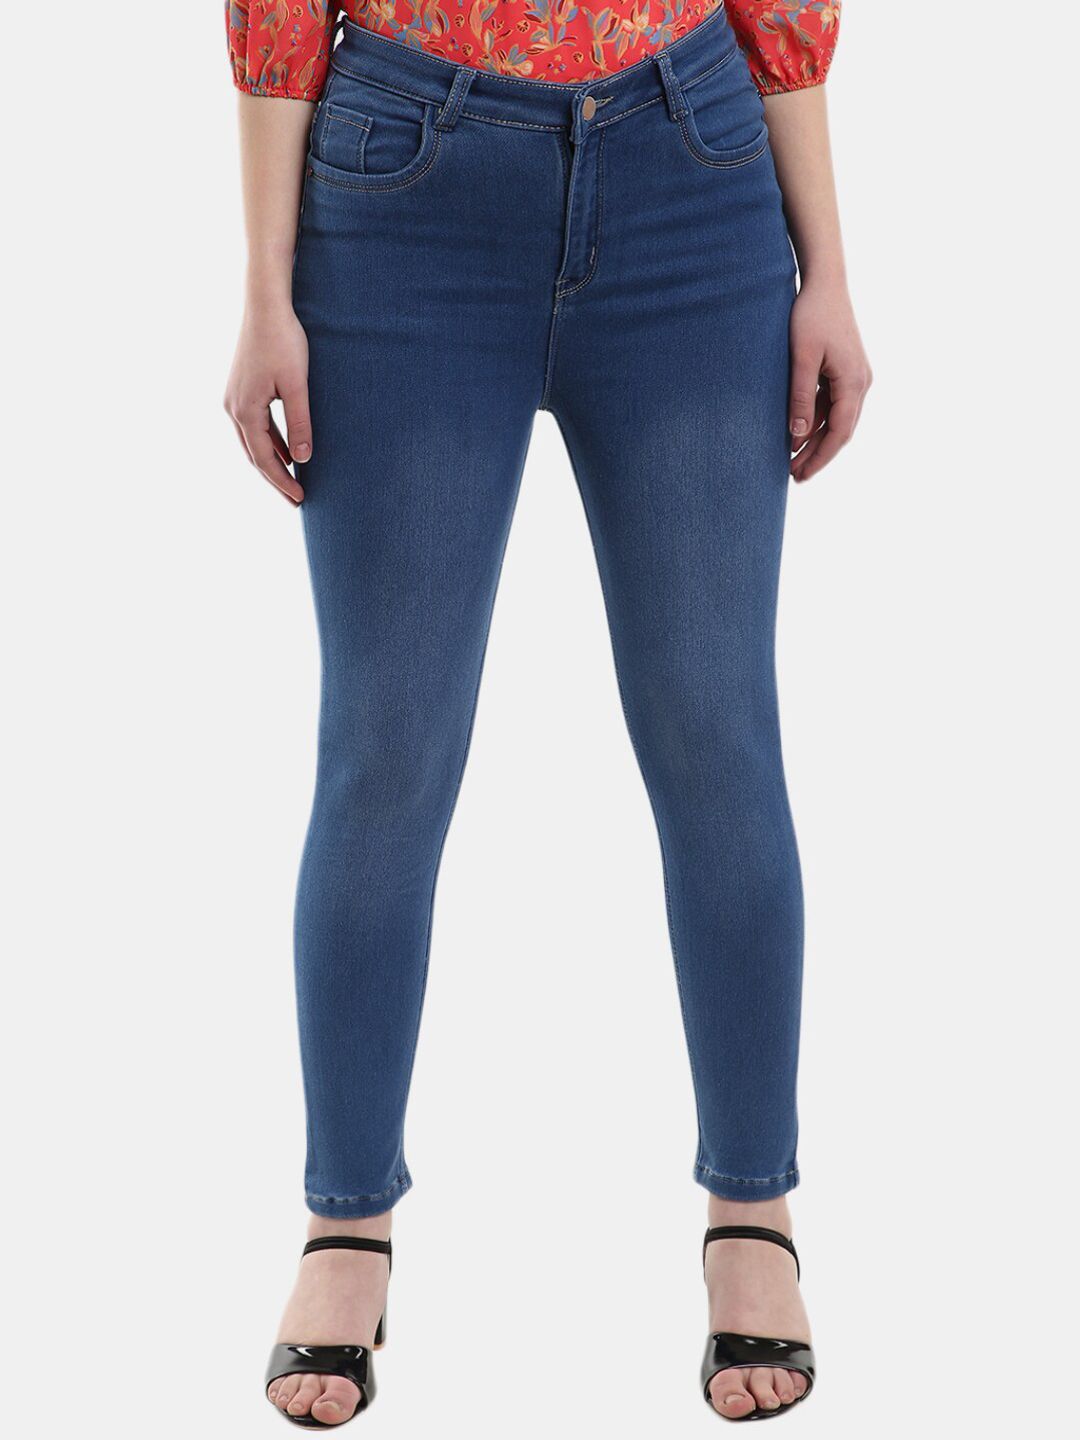 V-Mart Women Blue Classic Light Fade Jeans Price in India